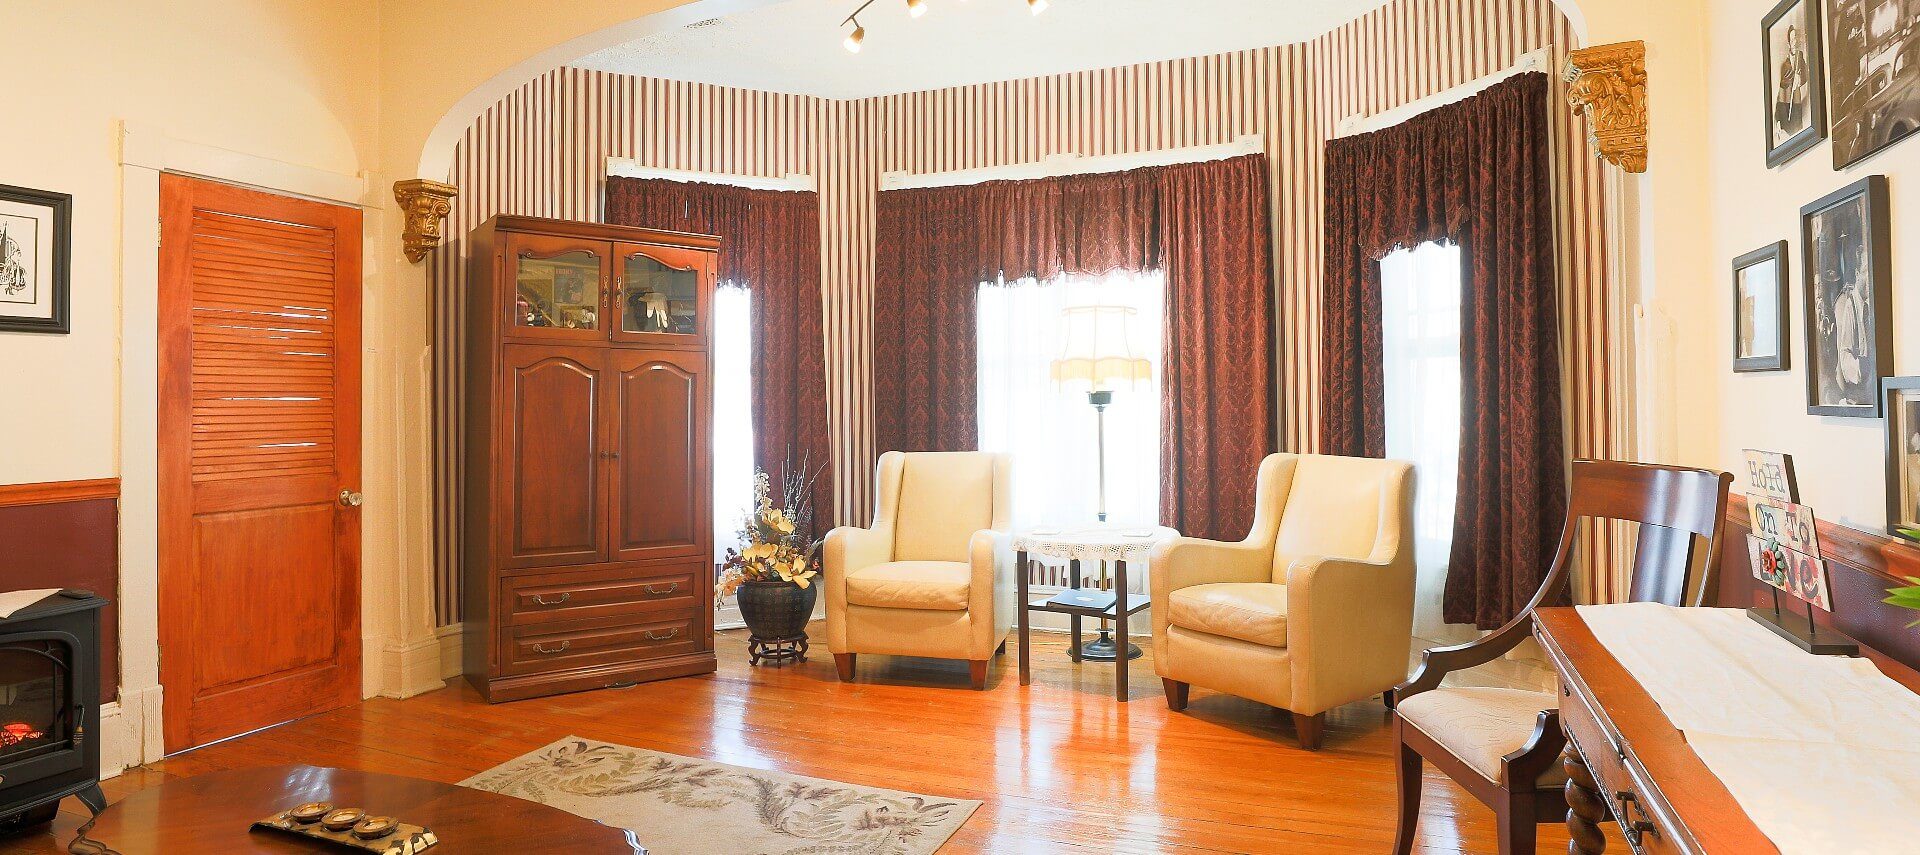 Large bay window with brown curtains and striped wallpaper behind two sitting chairs, side table, and tall armoire